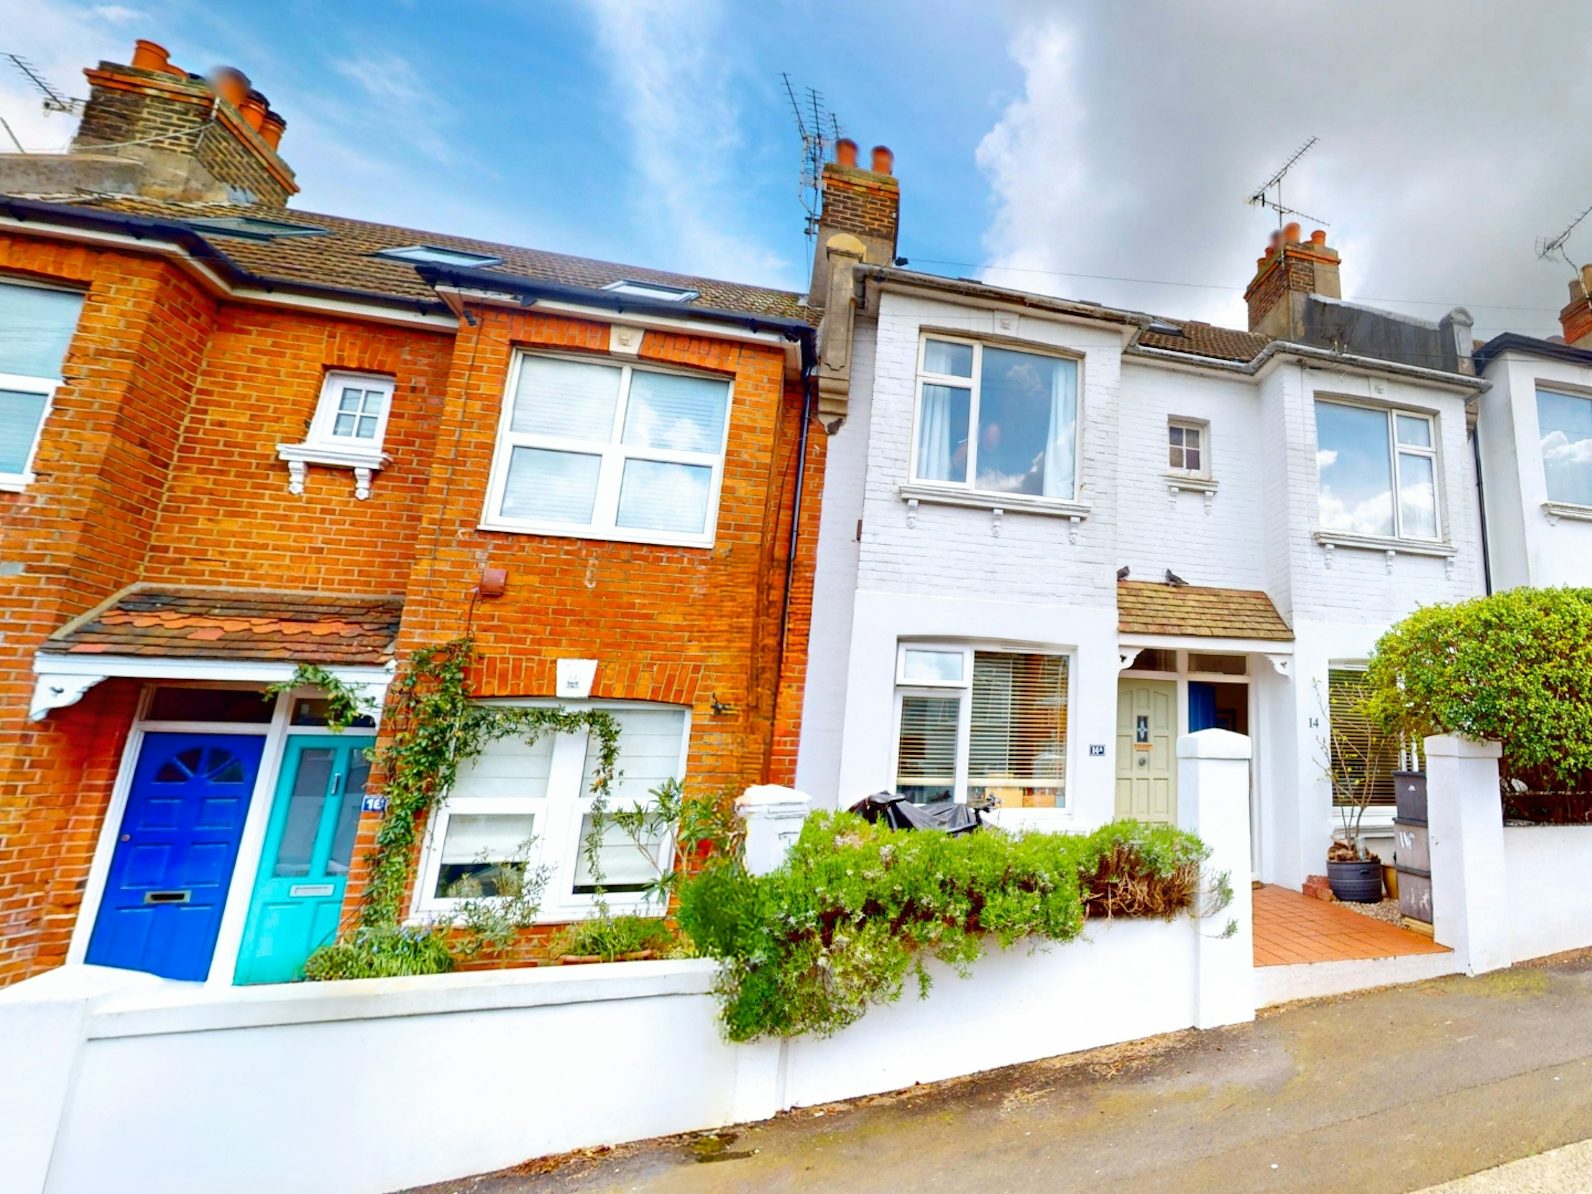 Flat for sale on Totland road Brighton, BN2